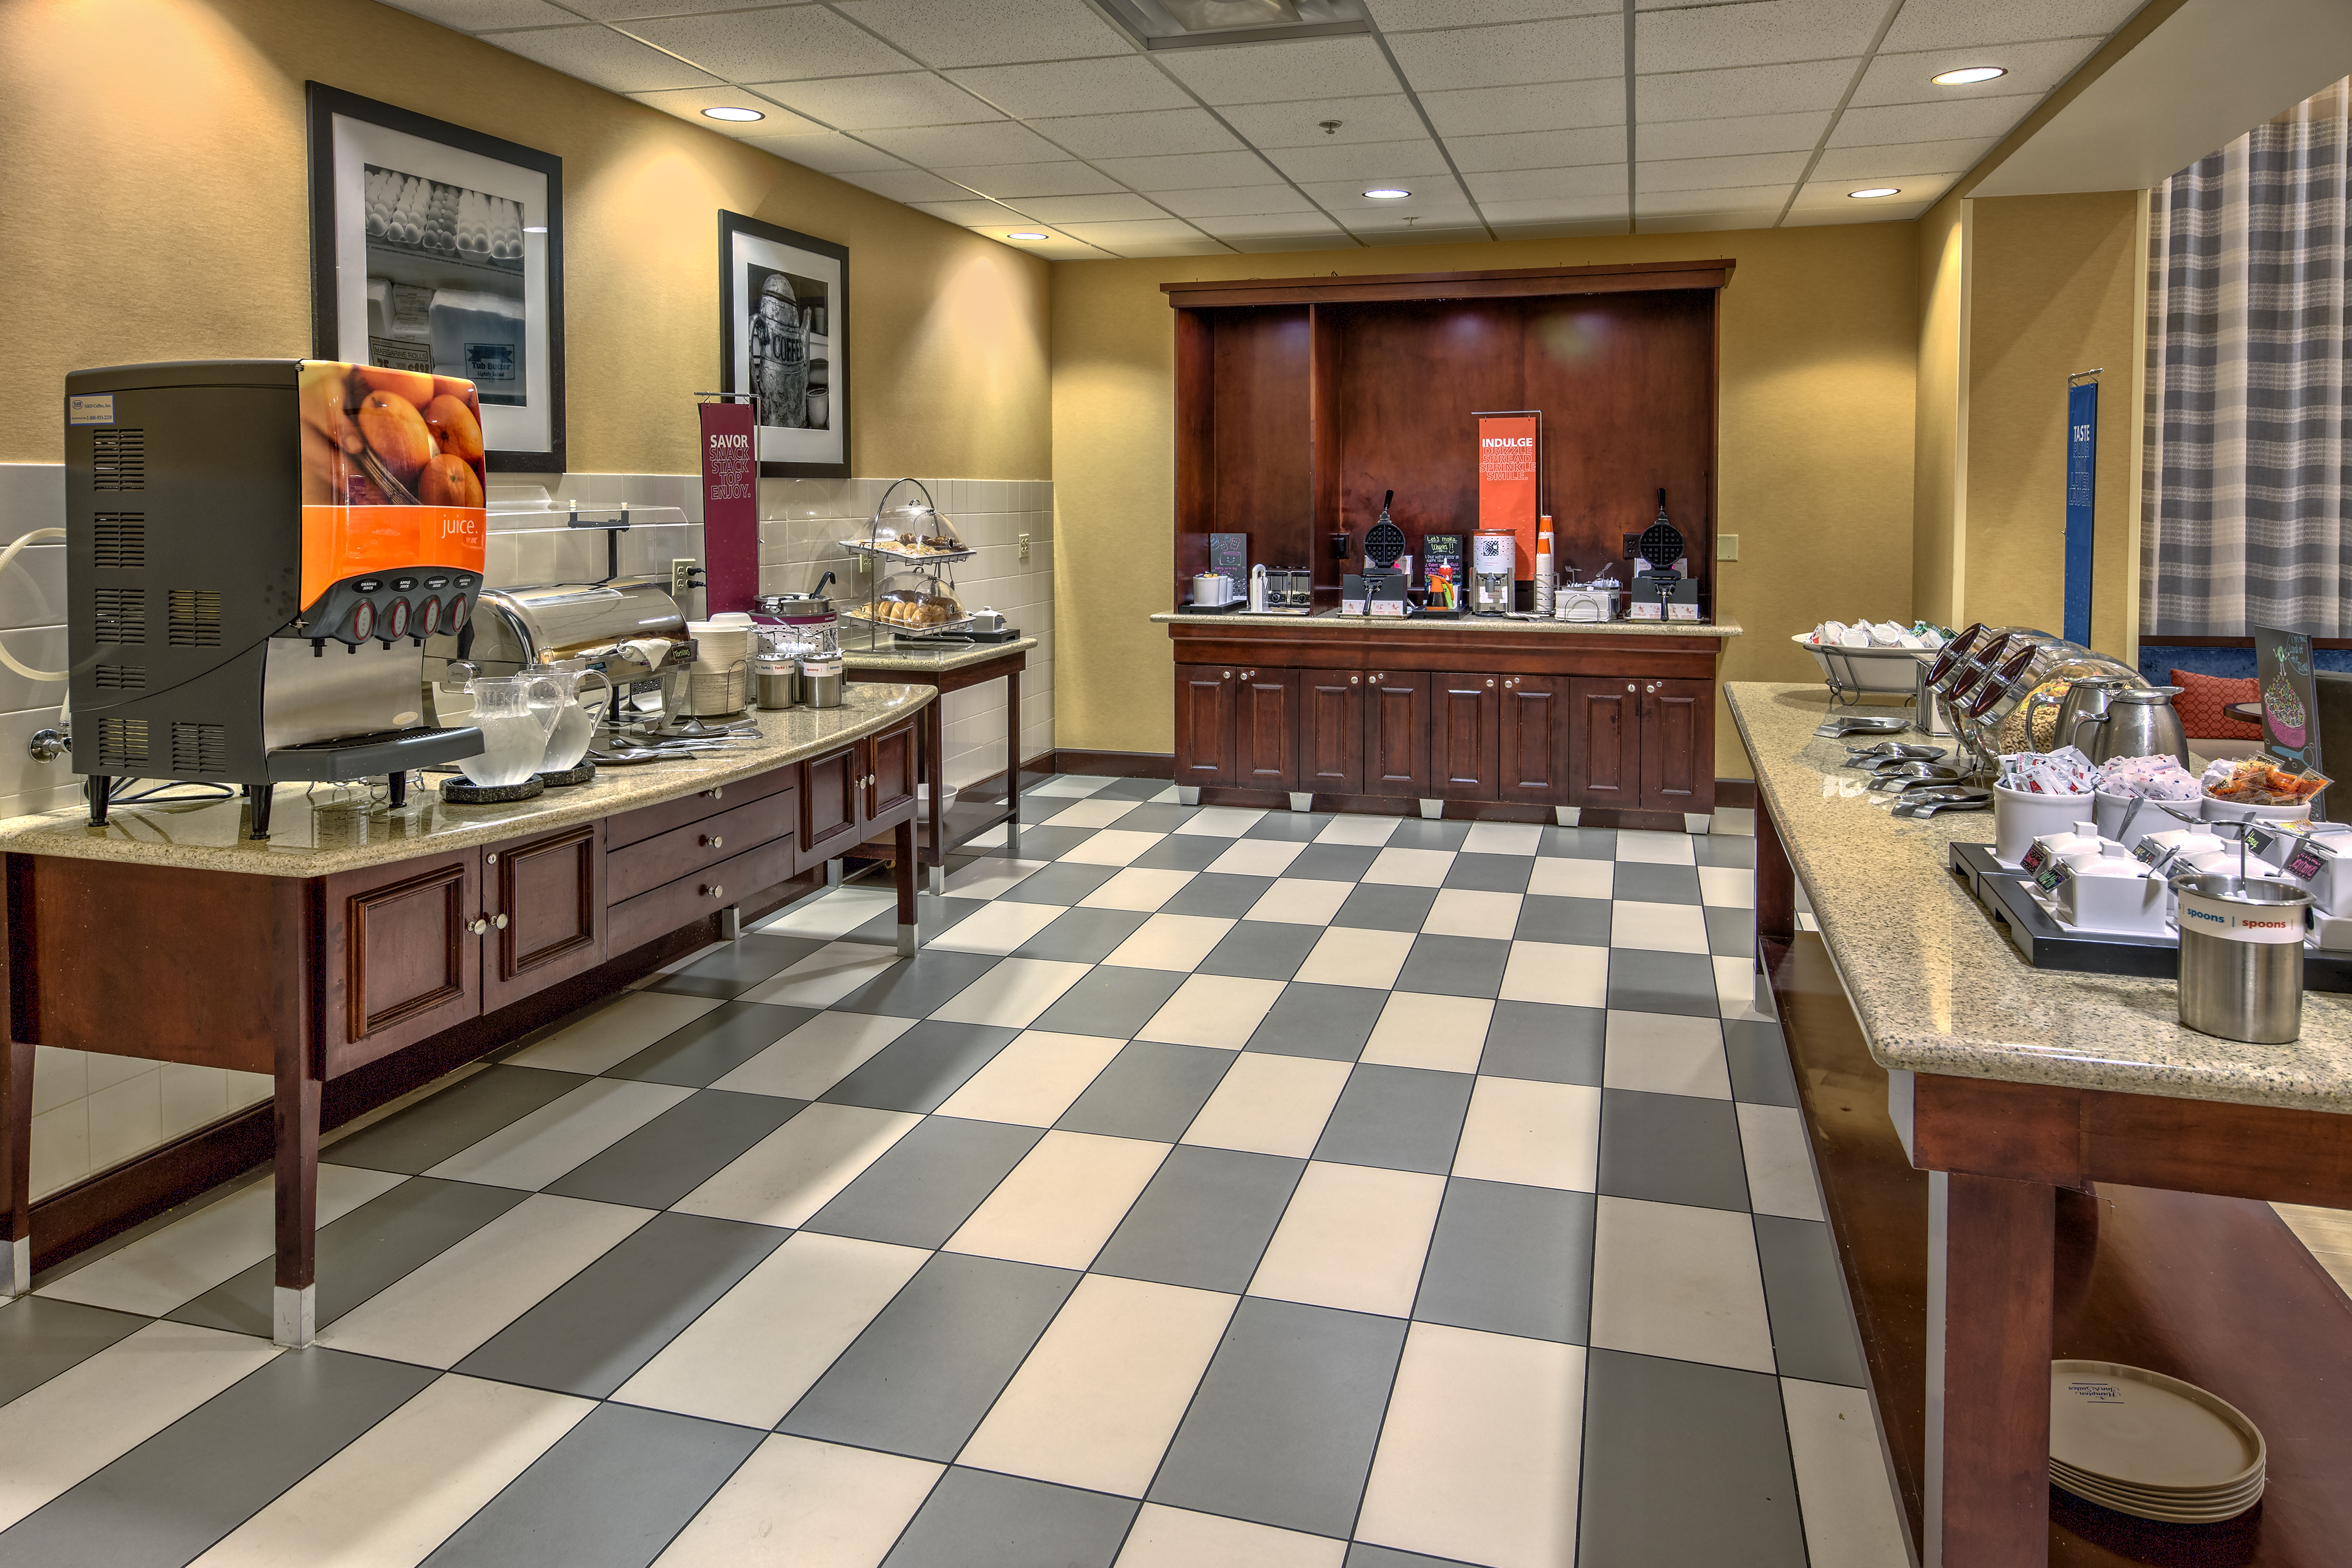 Breakfast Bar Area with Fresh Food and Drink Options 